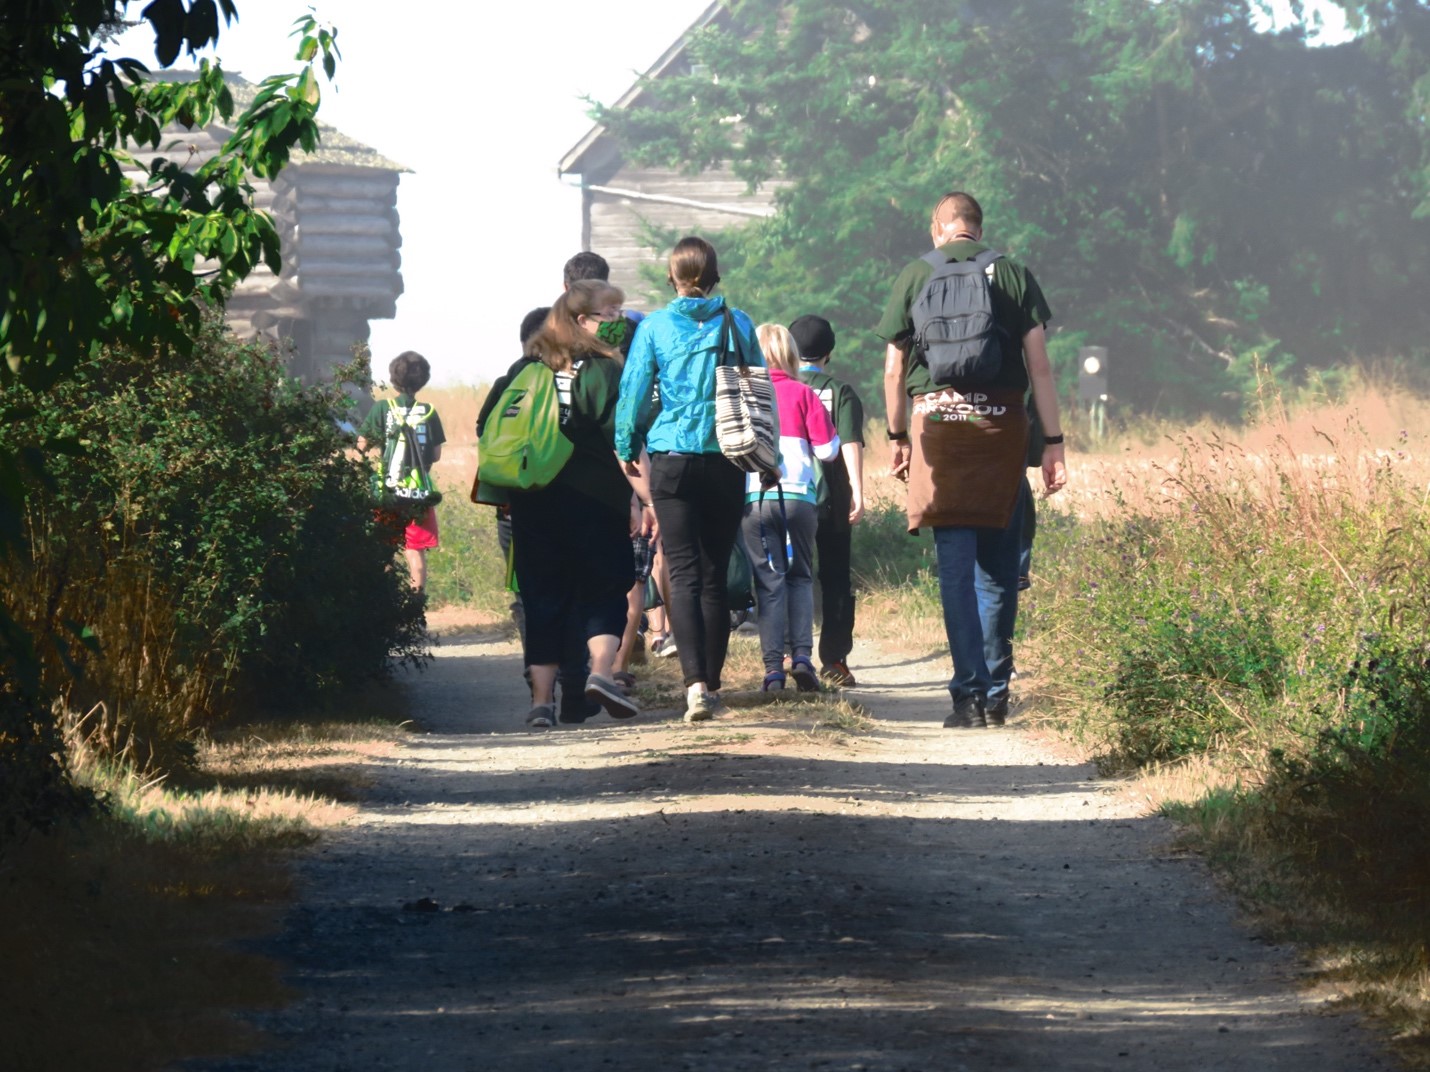 Group of adults and children walking down a gravel path